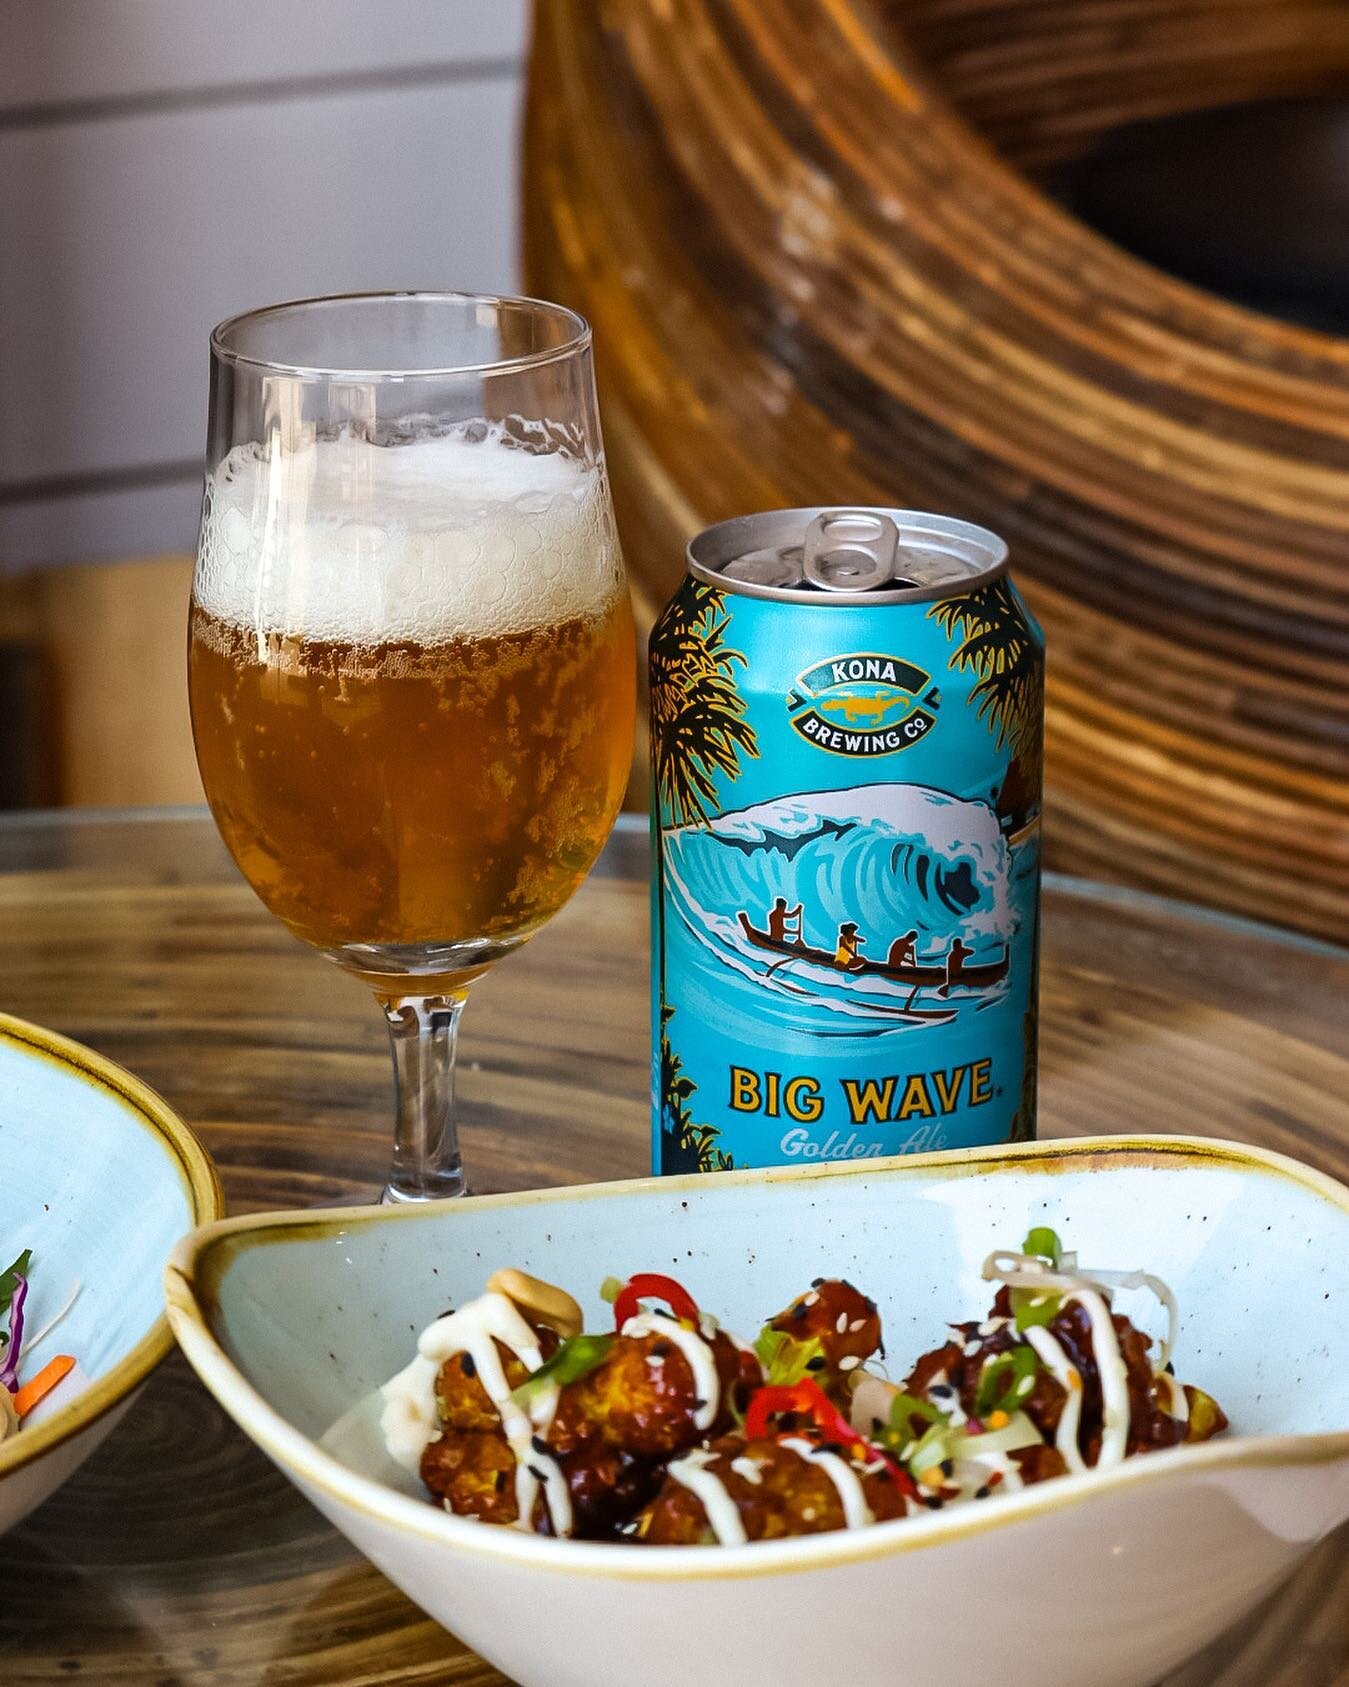 Small plates + cold beer 🍻 
.
Tell us a better lunchtime combo
.
Pop by and check out our new food and drink menus!
.
#driftin #driftinsurfcafe #eastwittering #westwitteringbeach #westwittering #cafe #caf&eacute; #food #drink #bigwave #konabrewingco